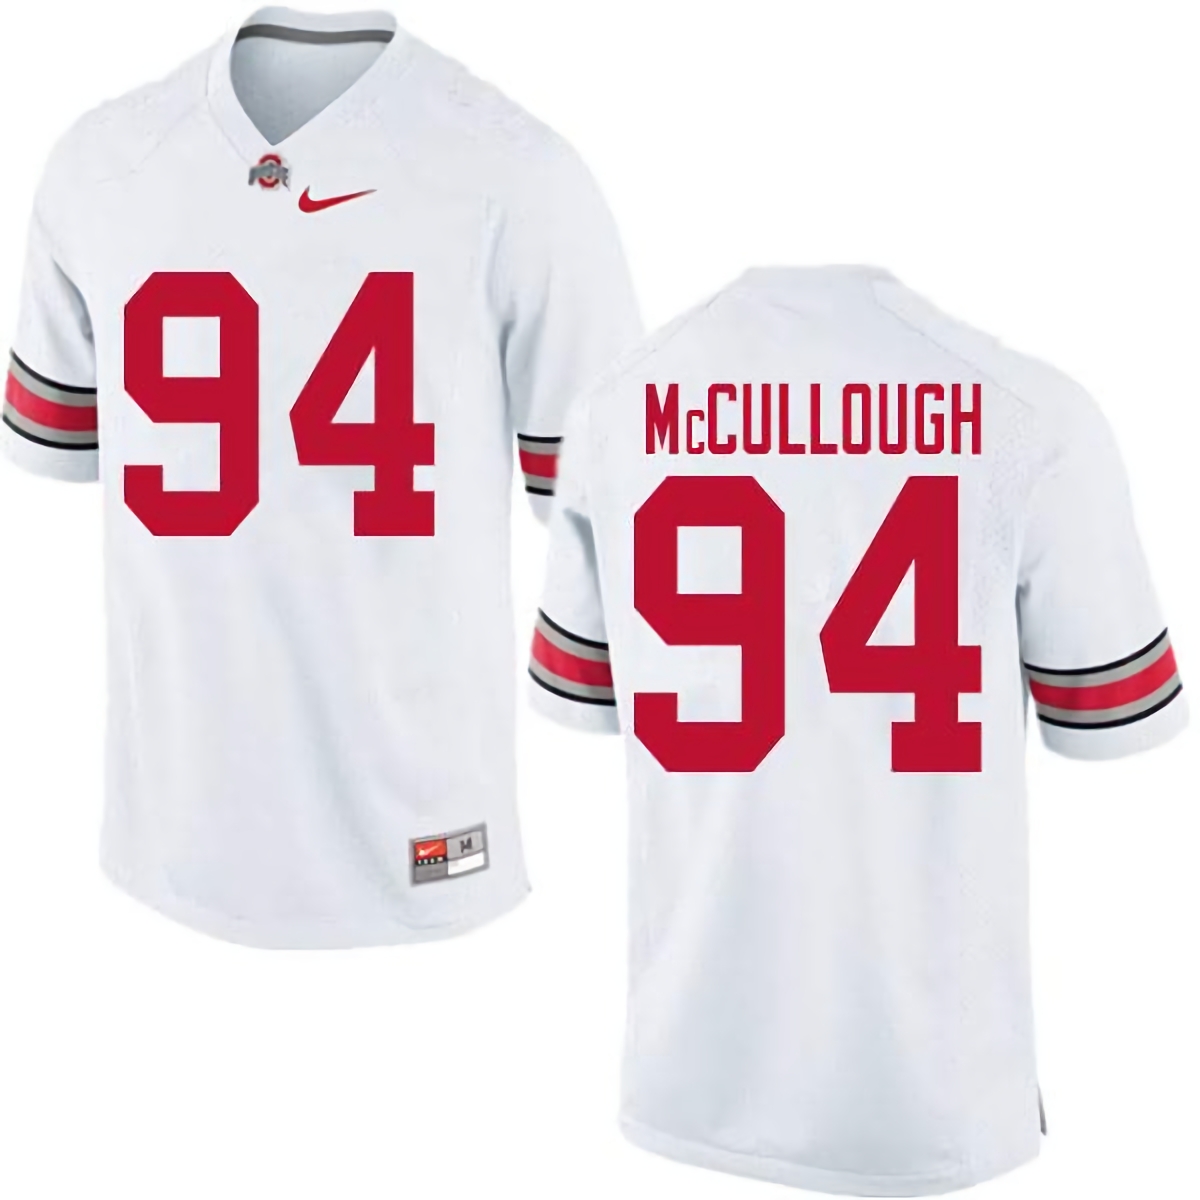 Roen McCullough Ohio State Buckeyes Men's NCAA #94 Nike White College Stitched Football Jersey AUE1756AH